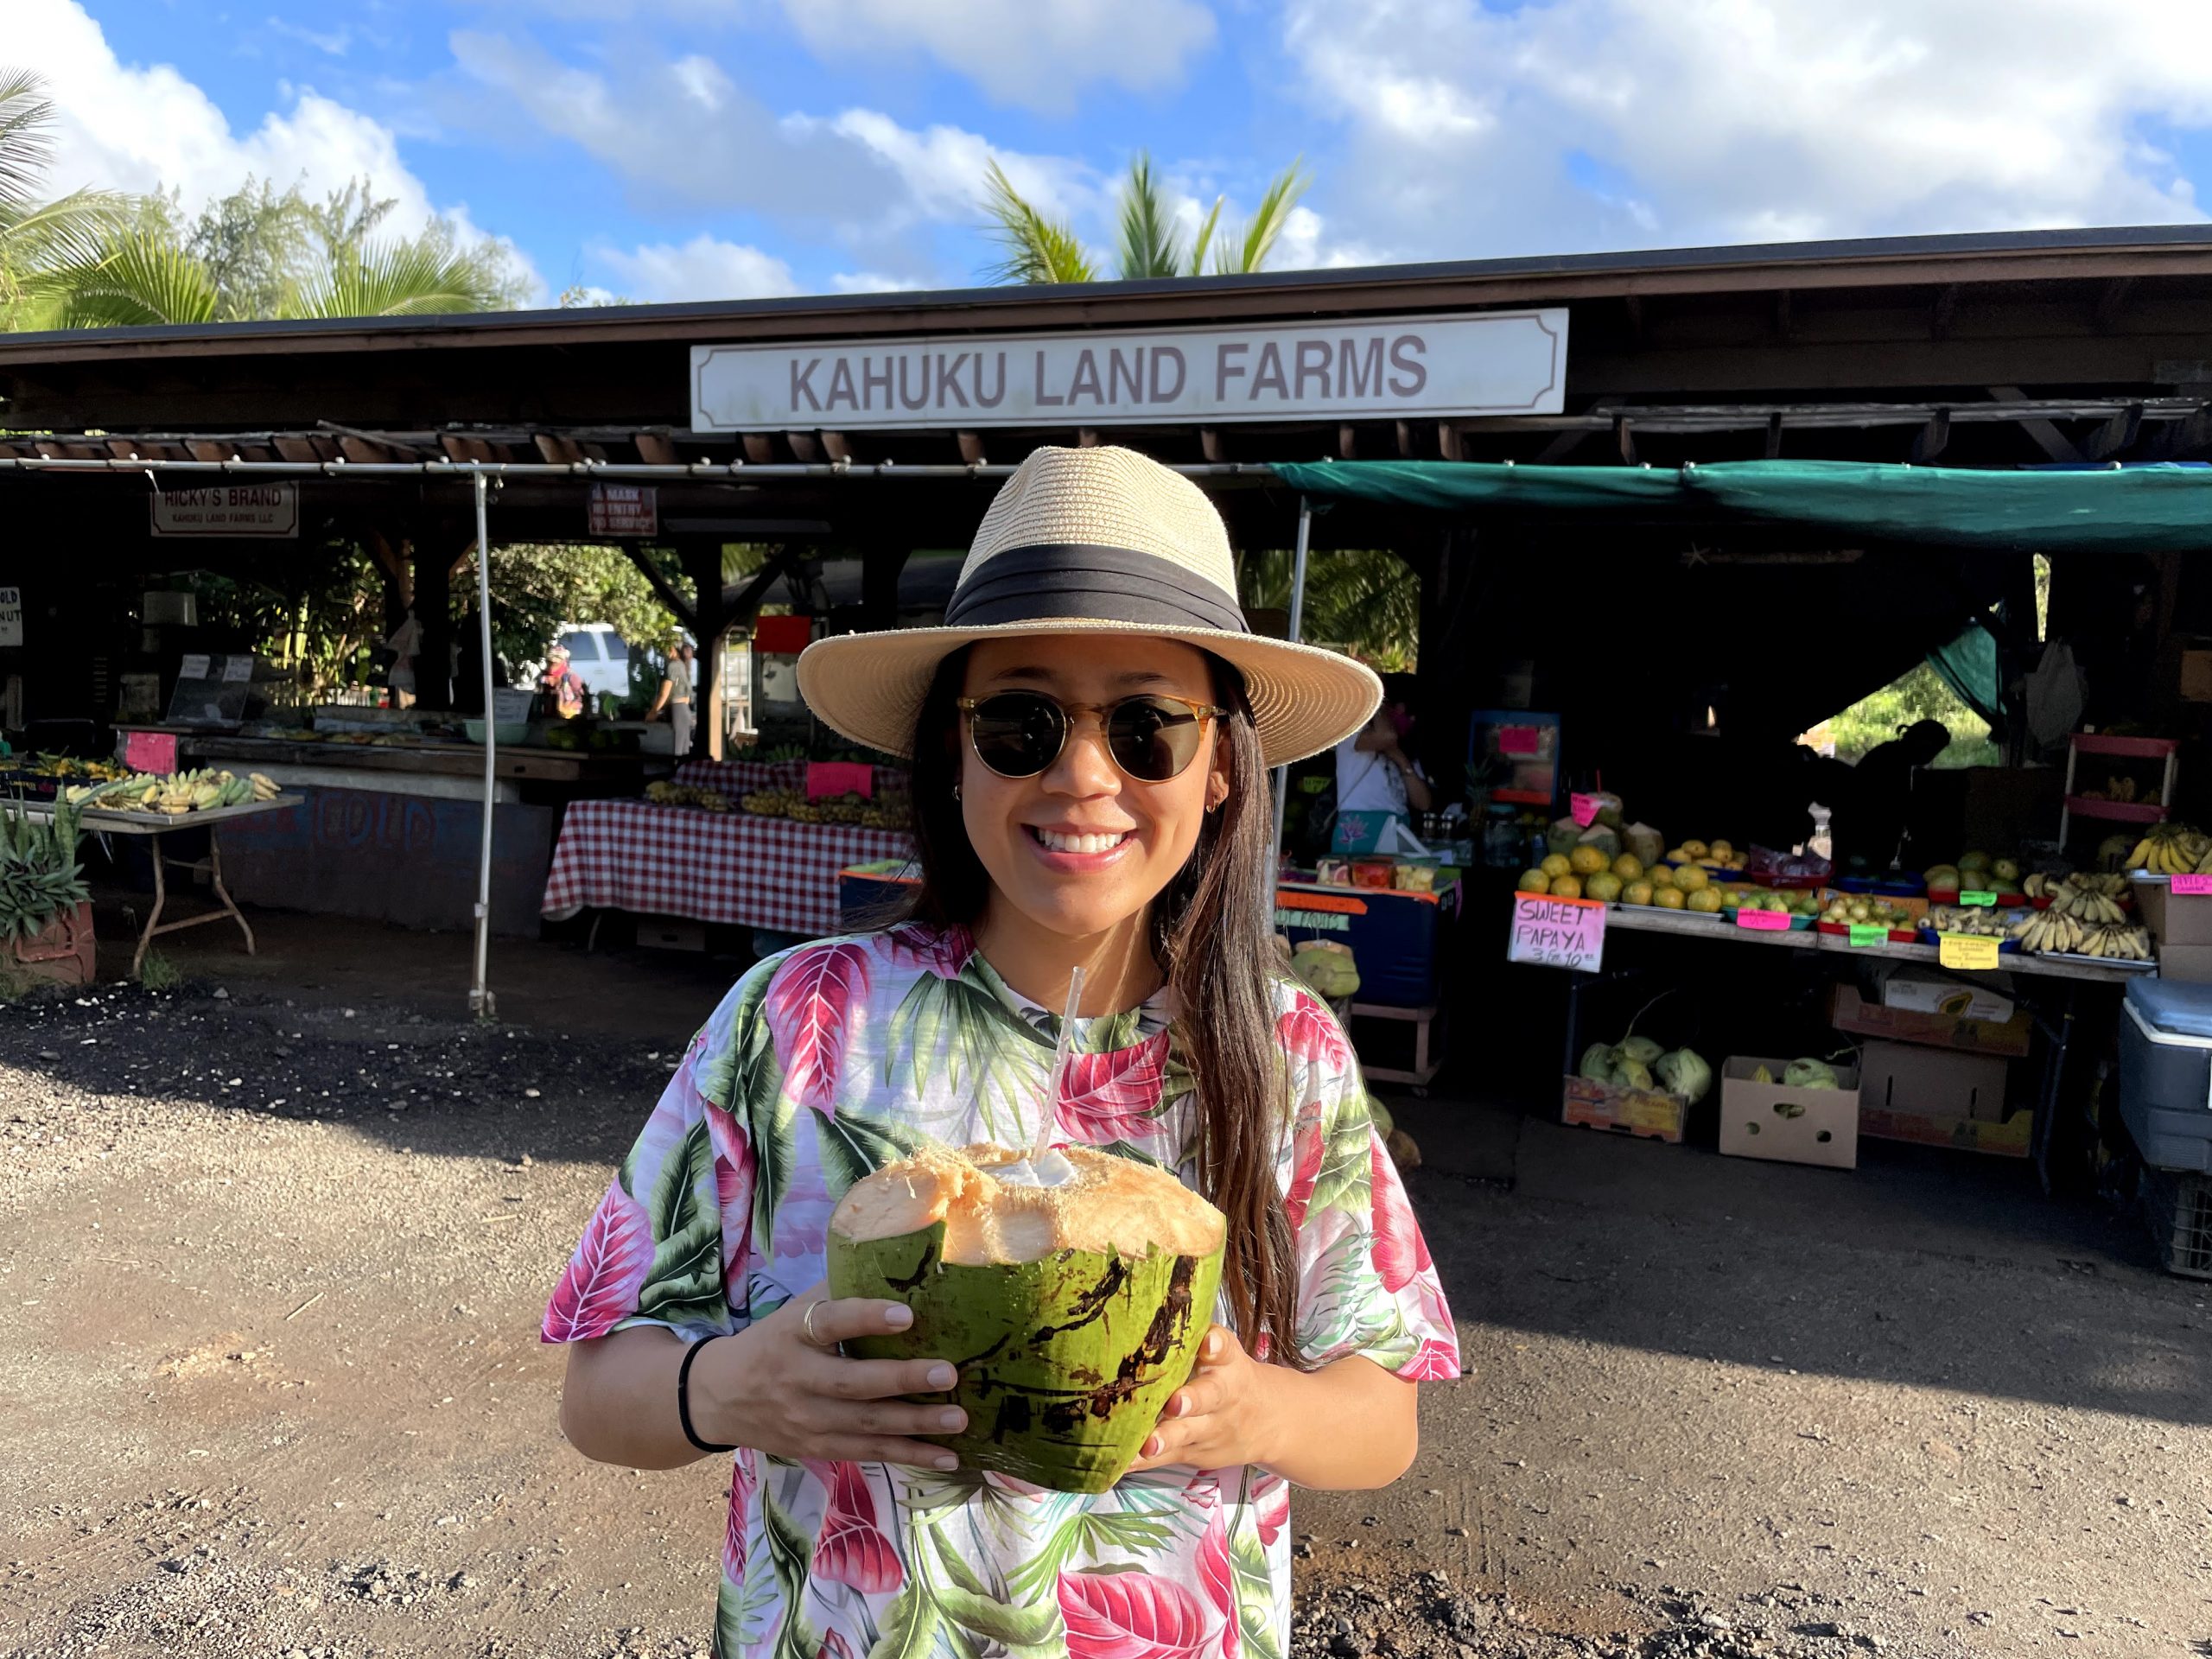 Drinking coconut water at a roadside stand